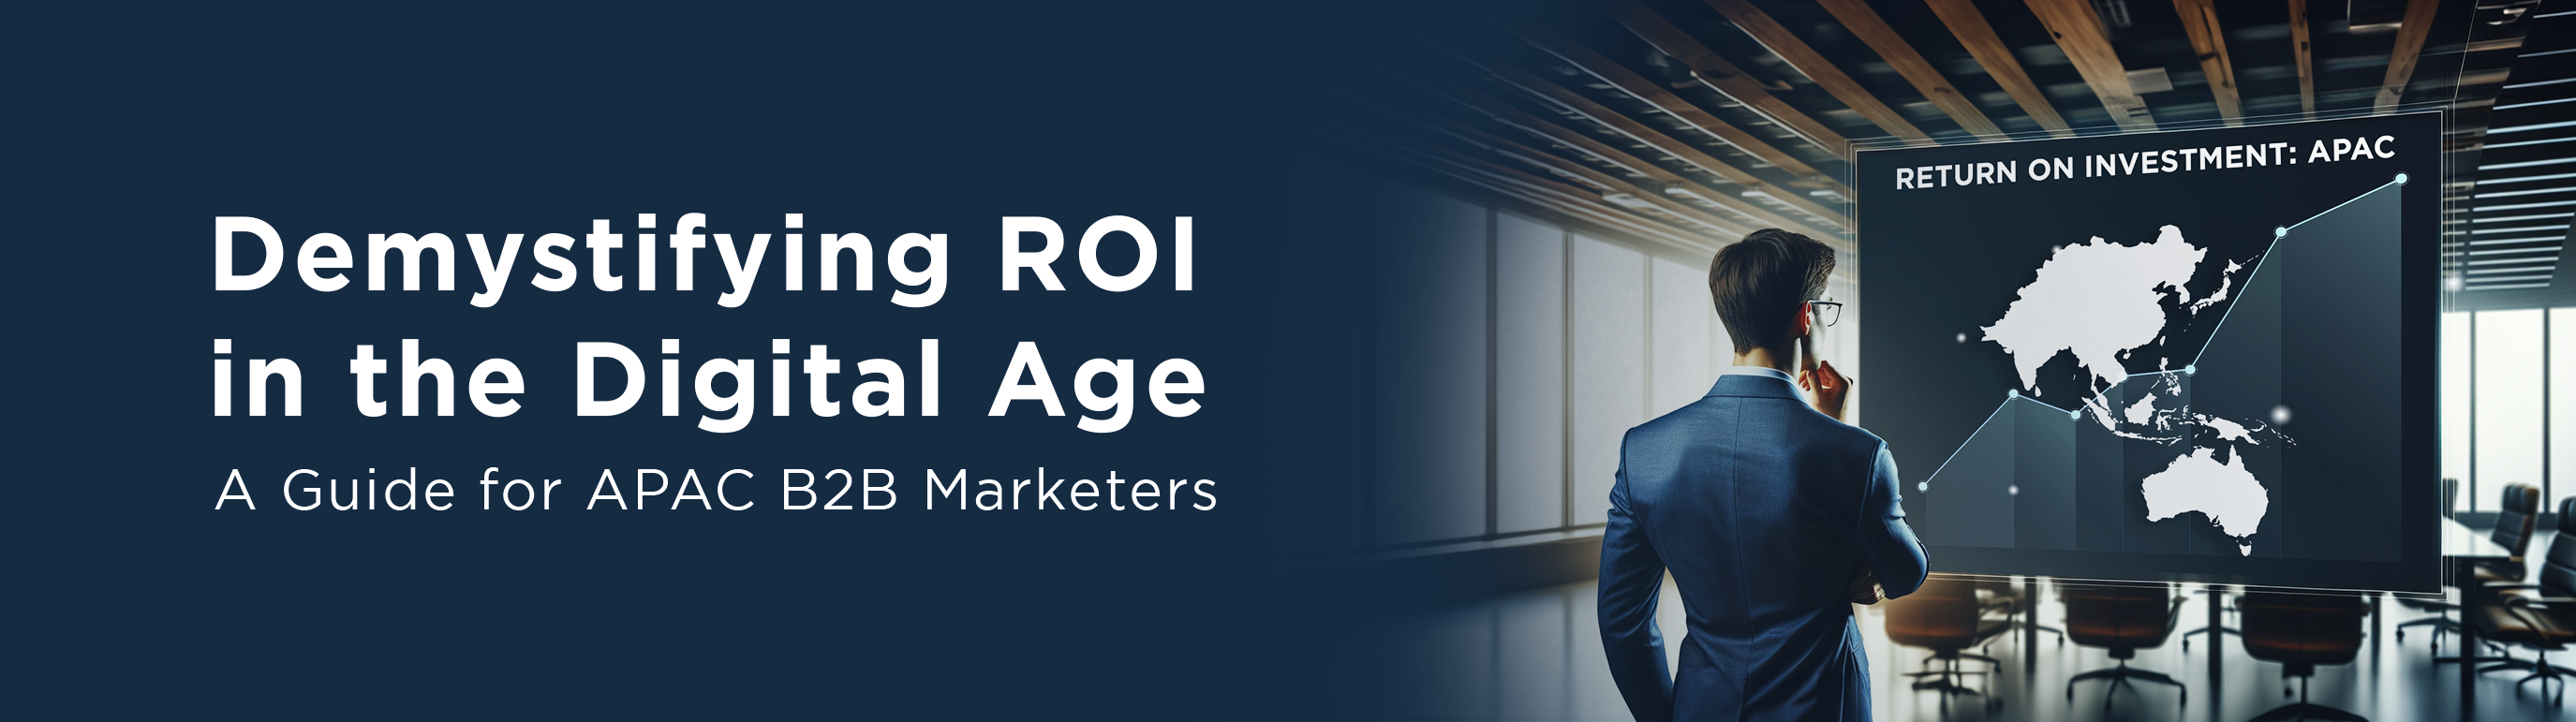 Demystifying ROI in the Digital Age: A Guide for APAC B2B Marketers